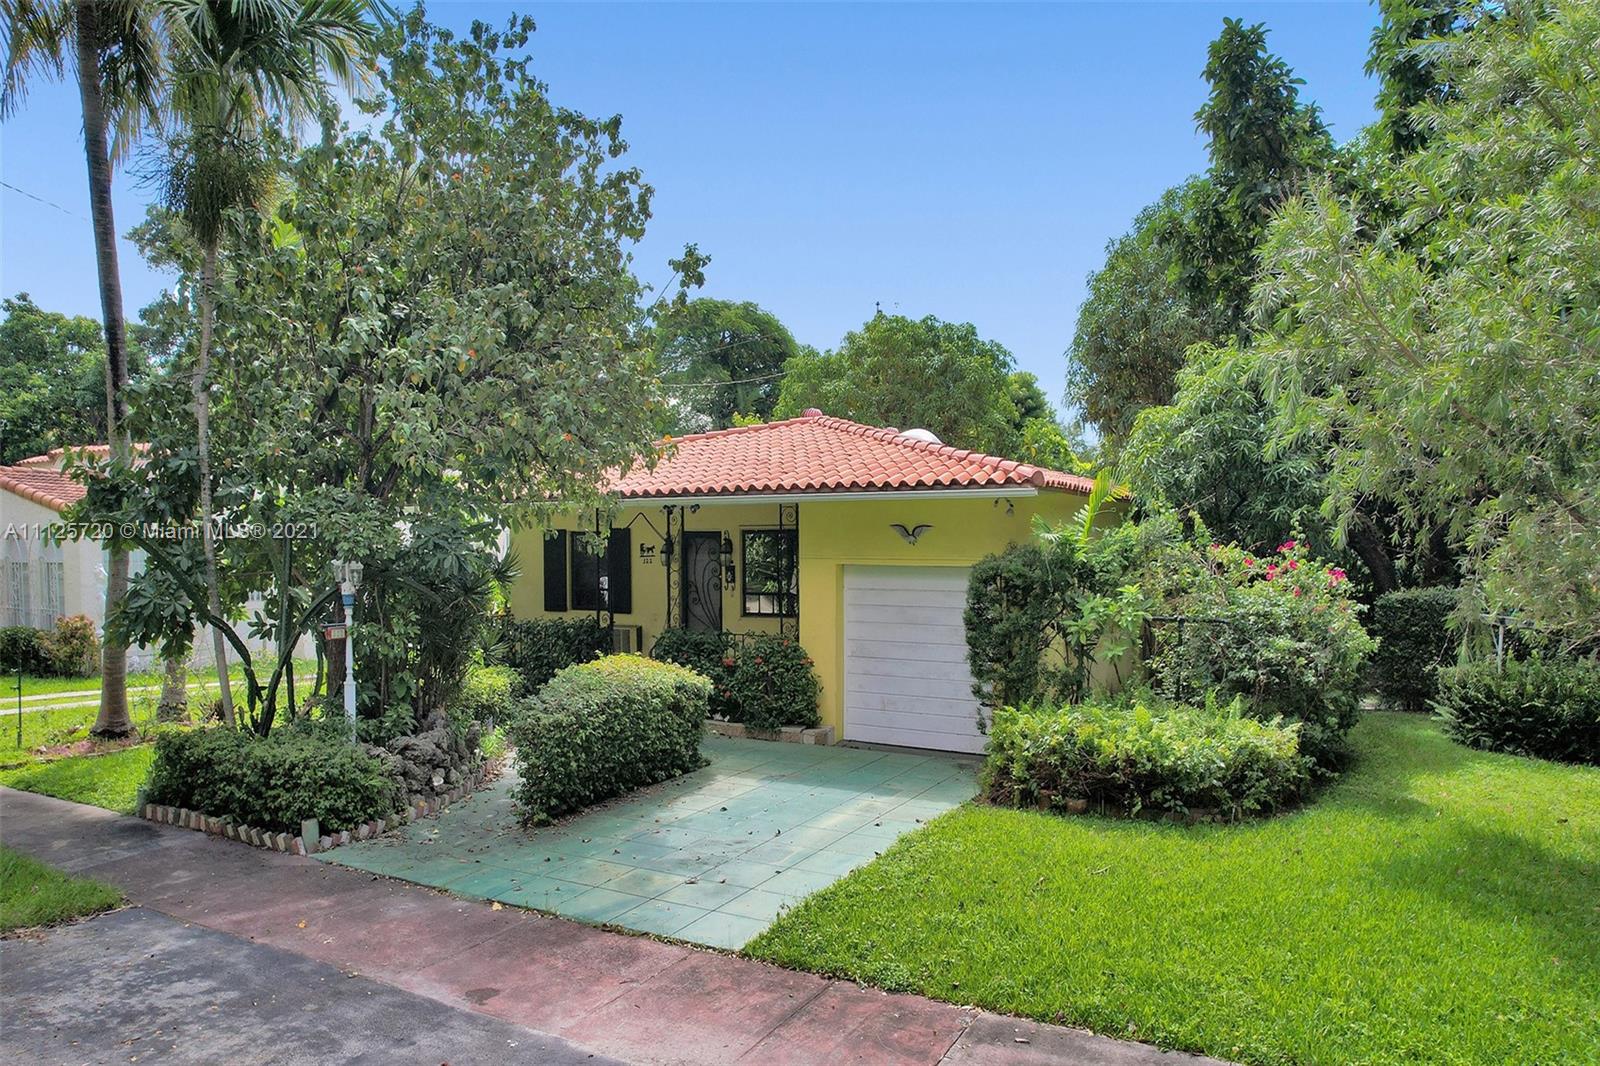 Charming 3-bedroom, 2-bath home with garage. Located in Coral Gables on an oversized 8,000 sf lot. Great location and ready for renovation. Lots of character inside and out. Mature landscape with fruit trees. Close to Miracle Mile and all that downtown Coral Gables has to offer. Sale is subject to Probate Court Approval.